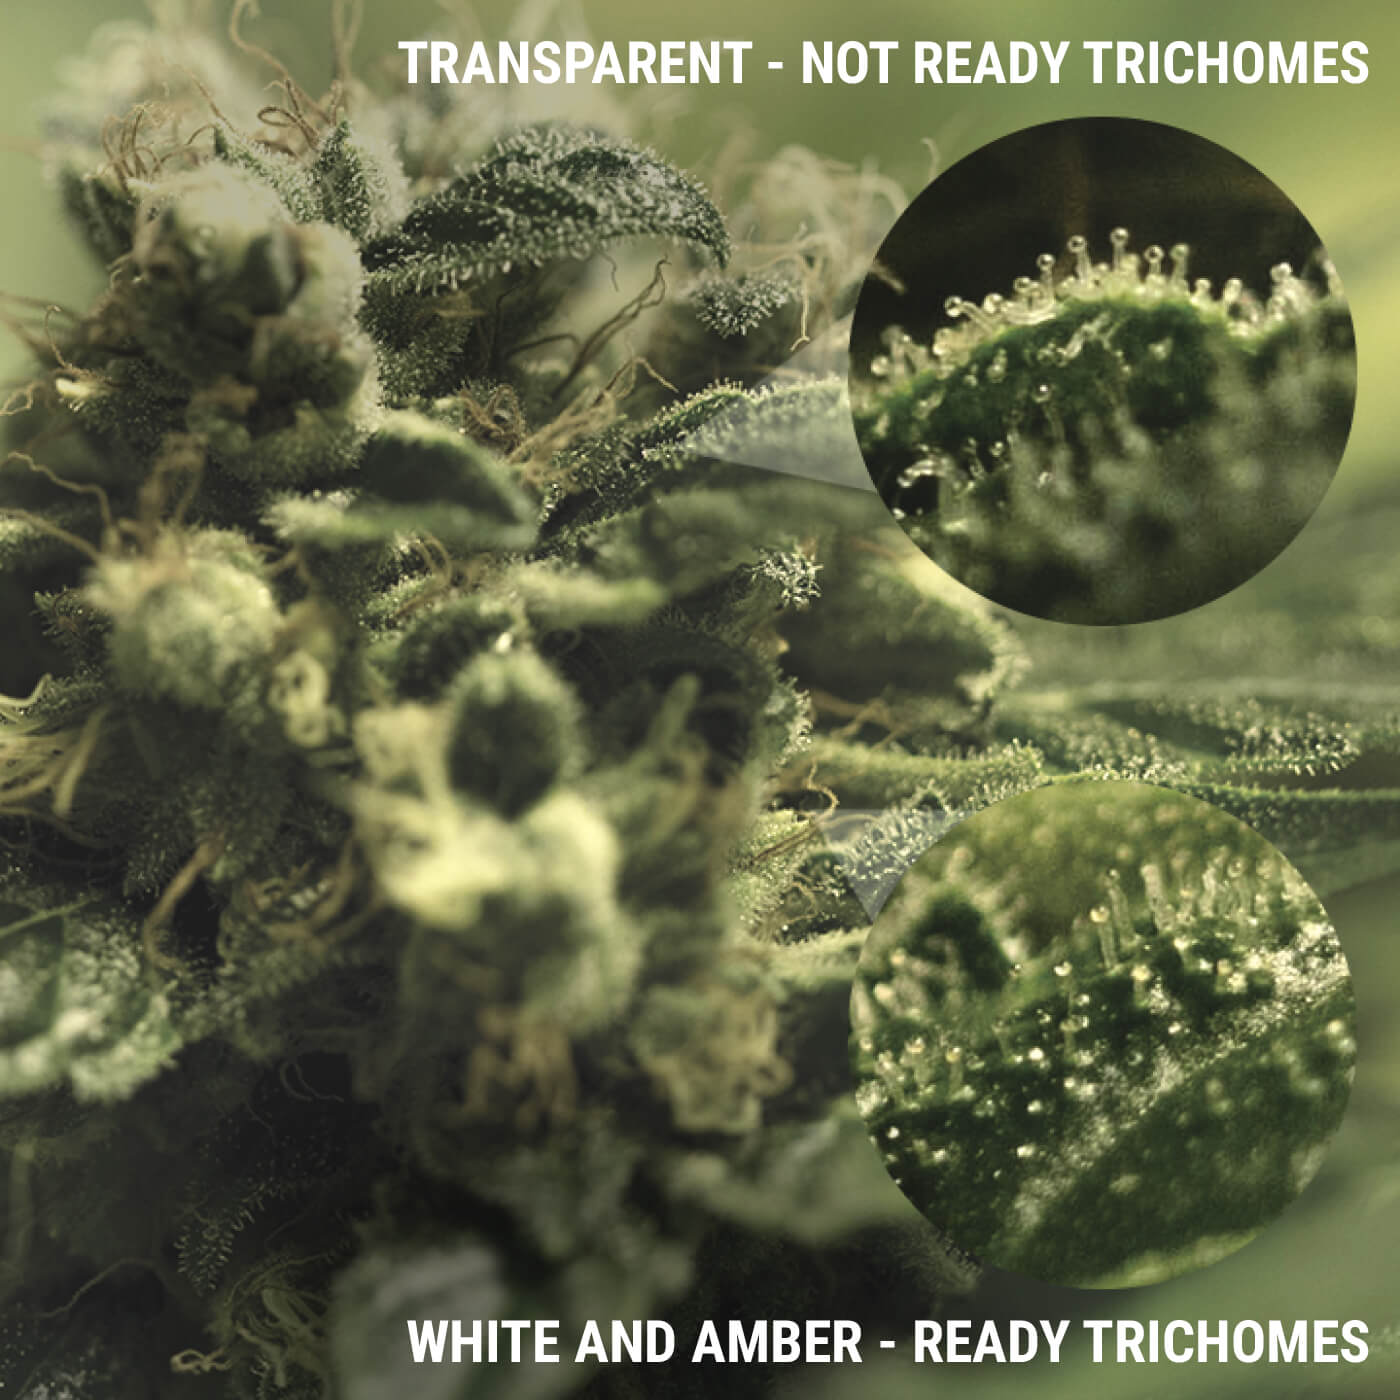 WHAT ARE TRICHOMES?